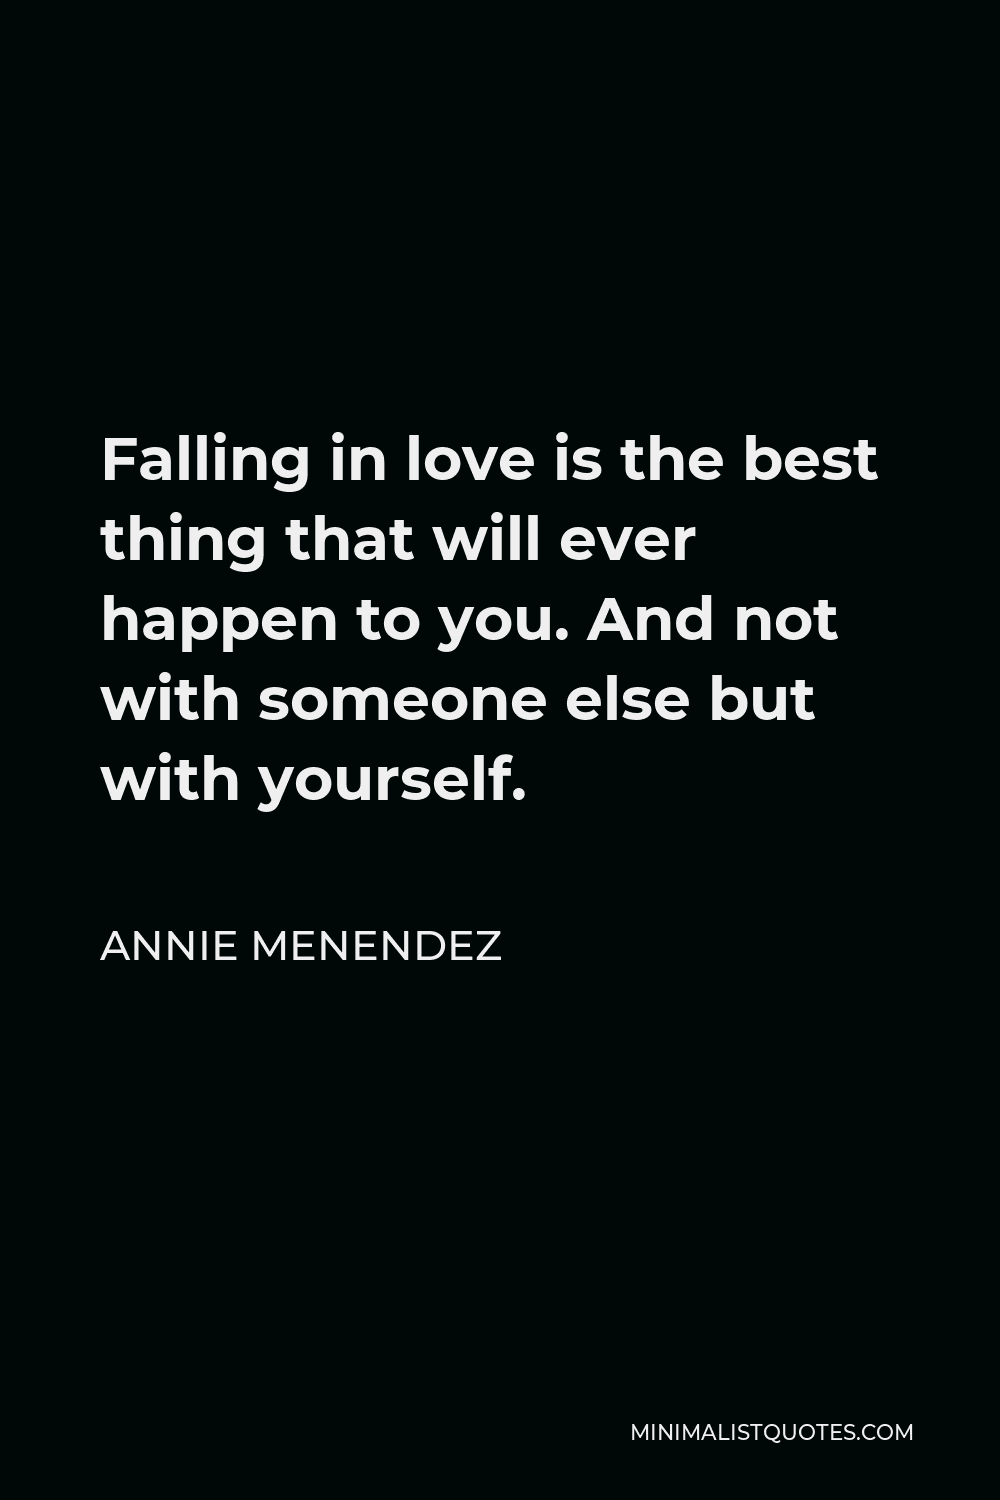 Annie Menendez Quote - Falling in love is the best thing that will ever happen to you. And not with someone else but with yourself.